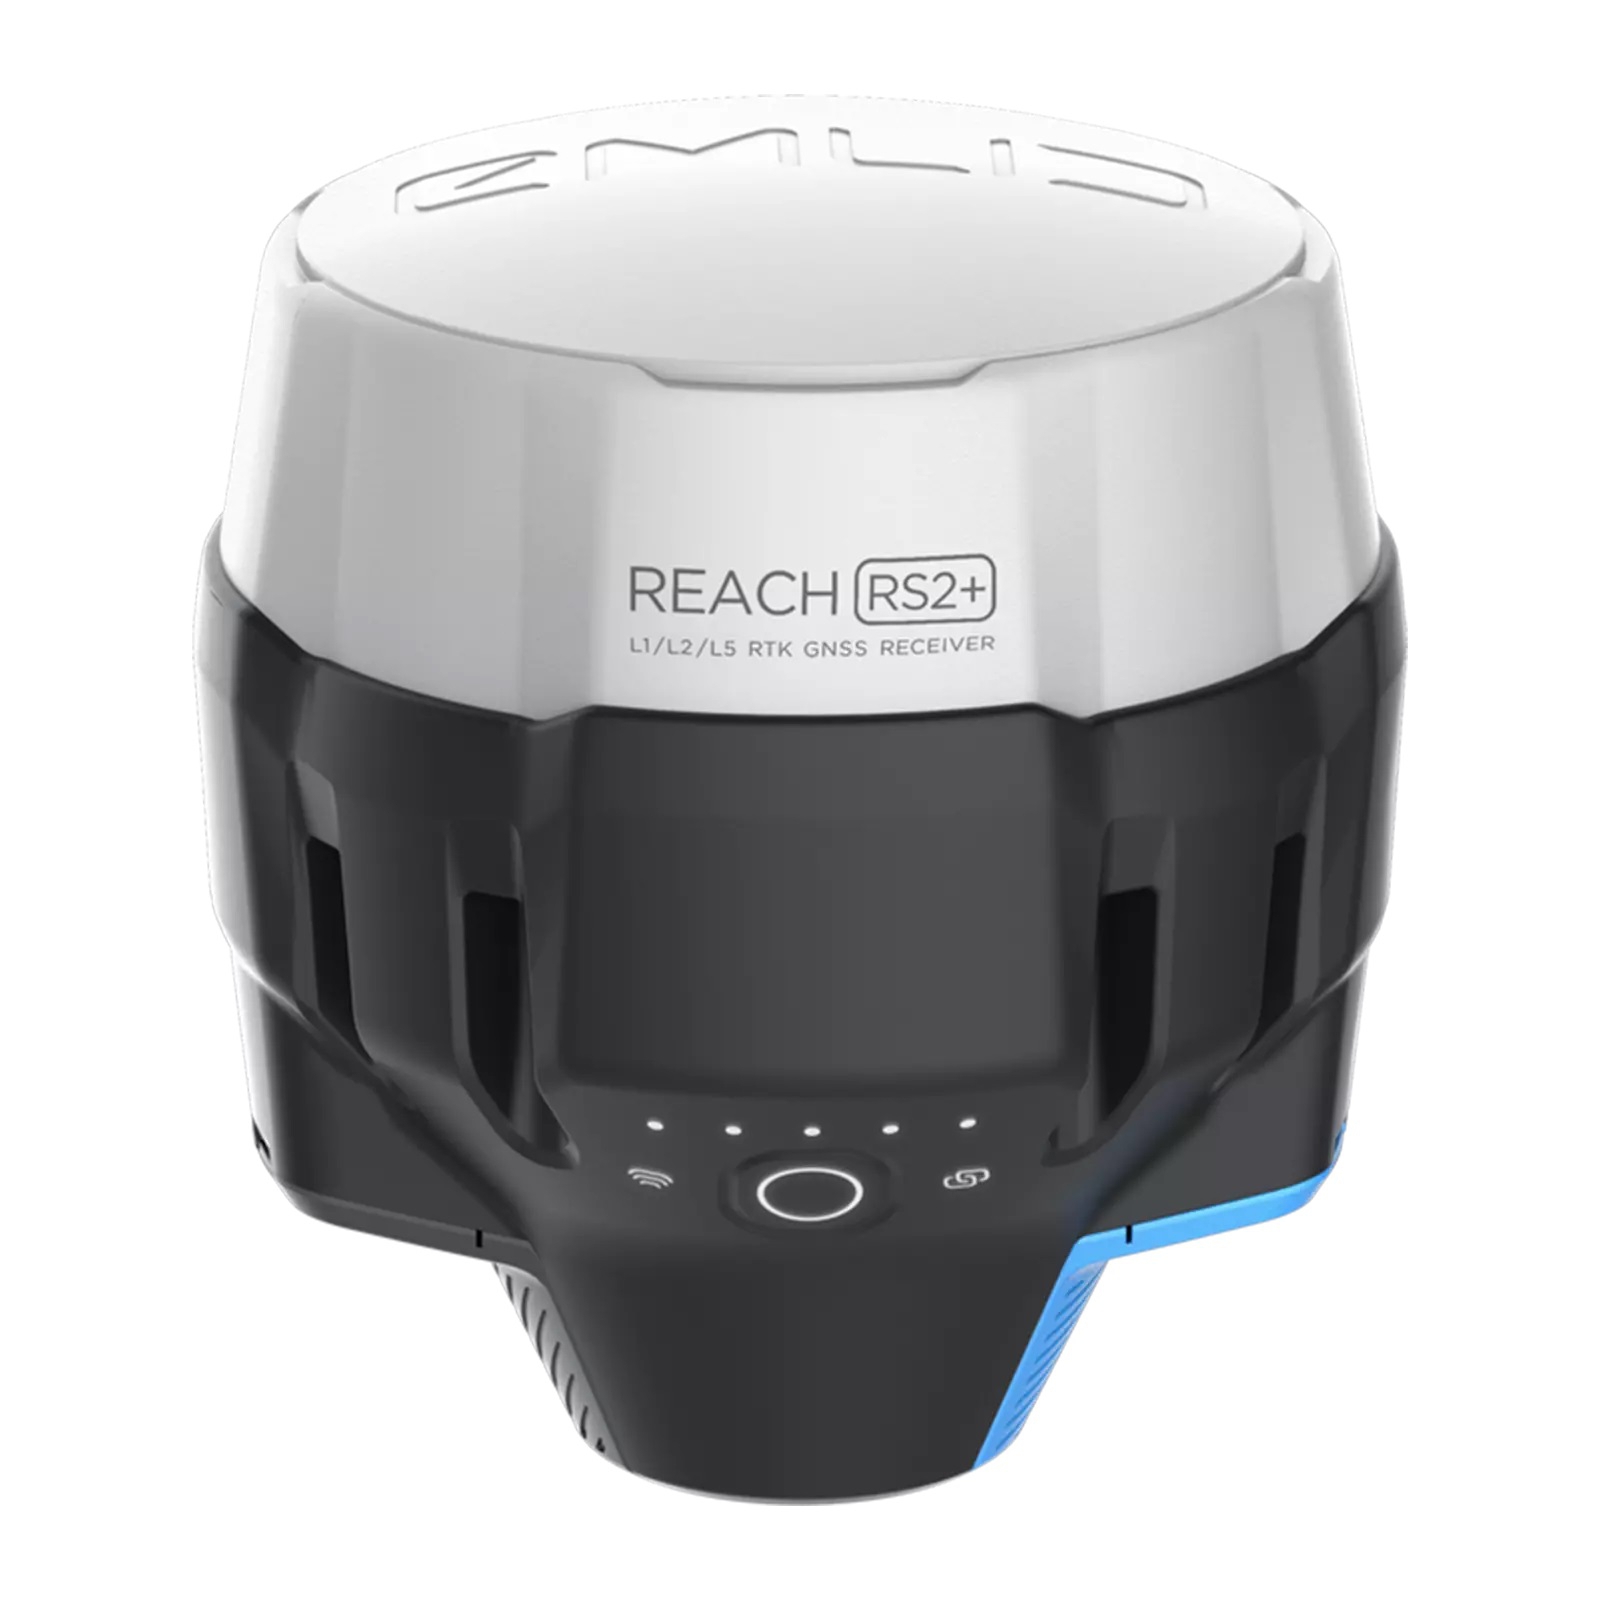 EMLID Reach RS2 (Multi-Band RTK GNSS Receiver) image 1_EPOTRONIC